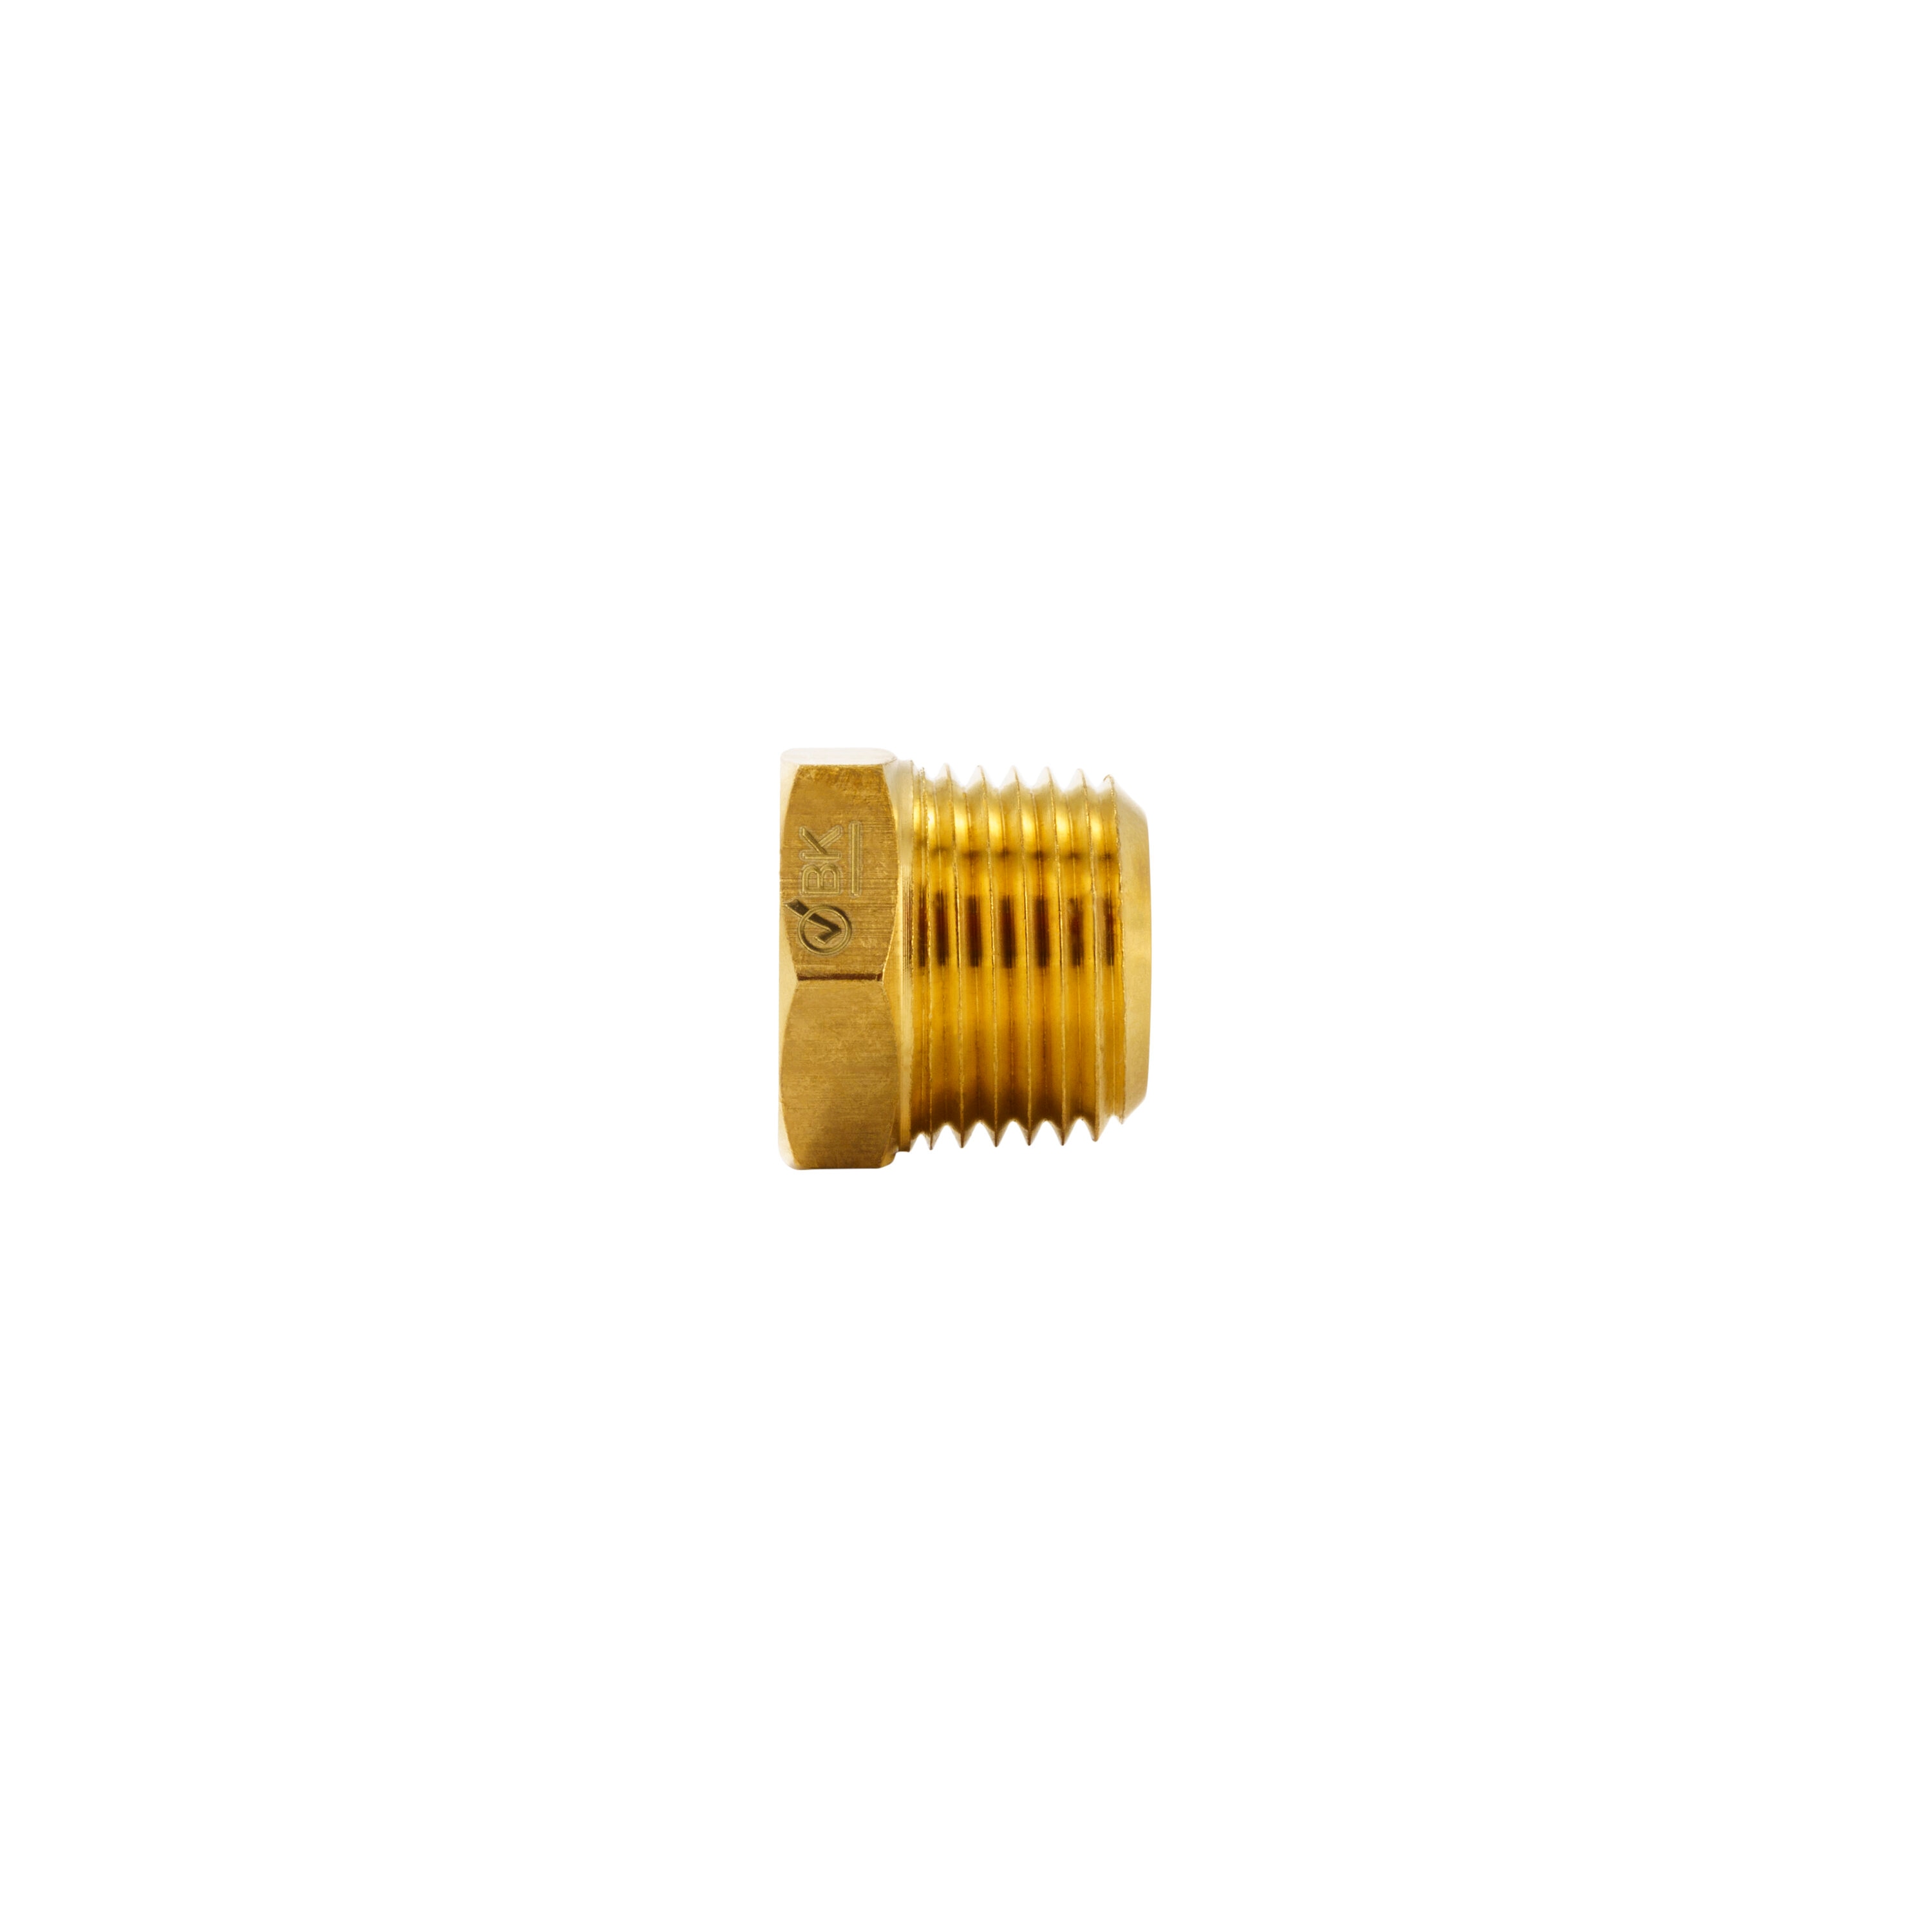 Legines Brass Compression Fitting, Male Connector, Adapter, 3/16 Tube OD x  1/4NPT Male, Pack of 2